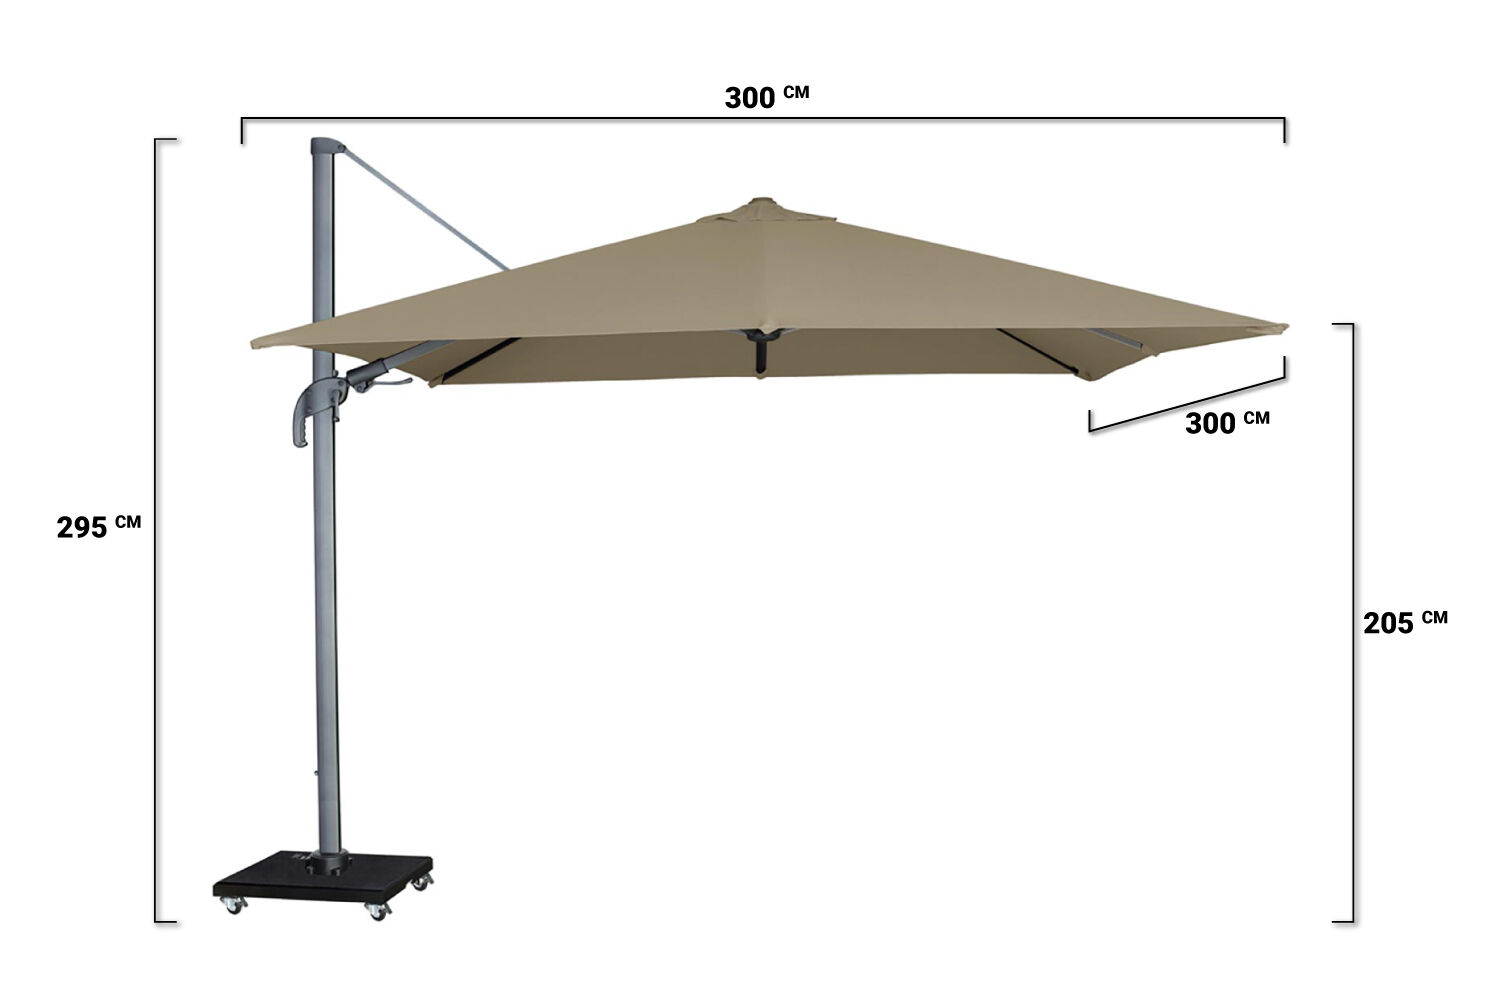 Onbepaald Geef energie ding Garden Collections Alegria zweefparasol 300 x 300 taupe - Tuinmeubelshop.nl